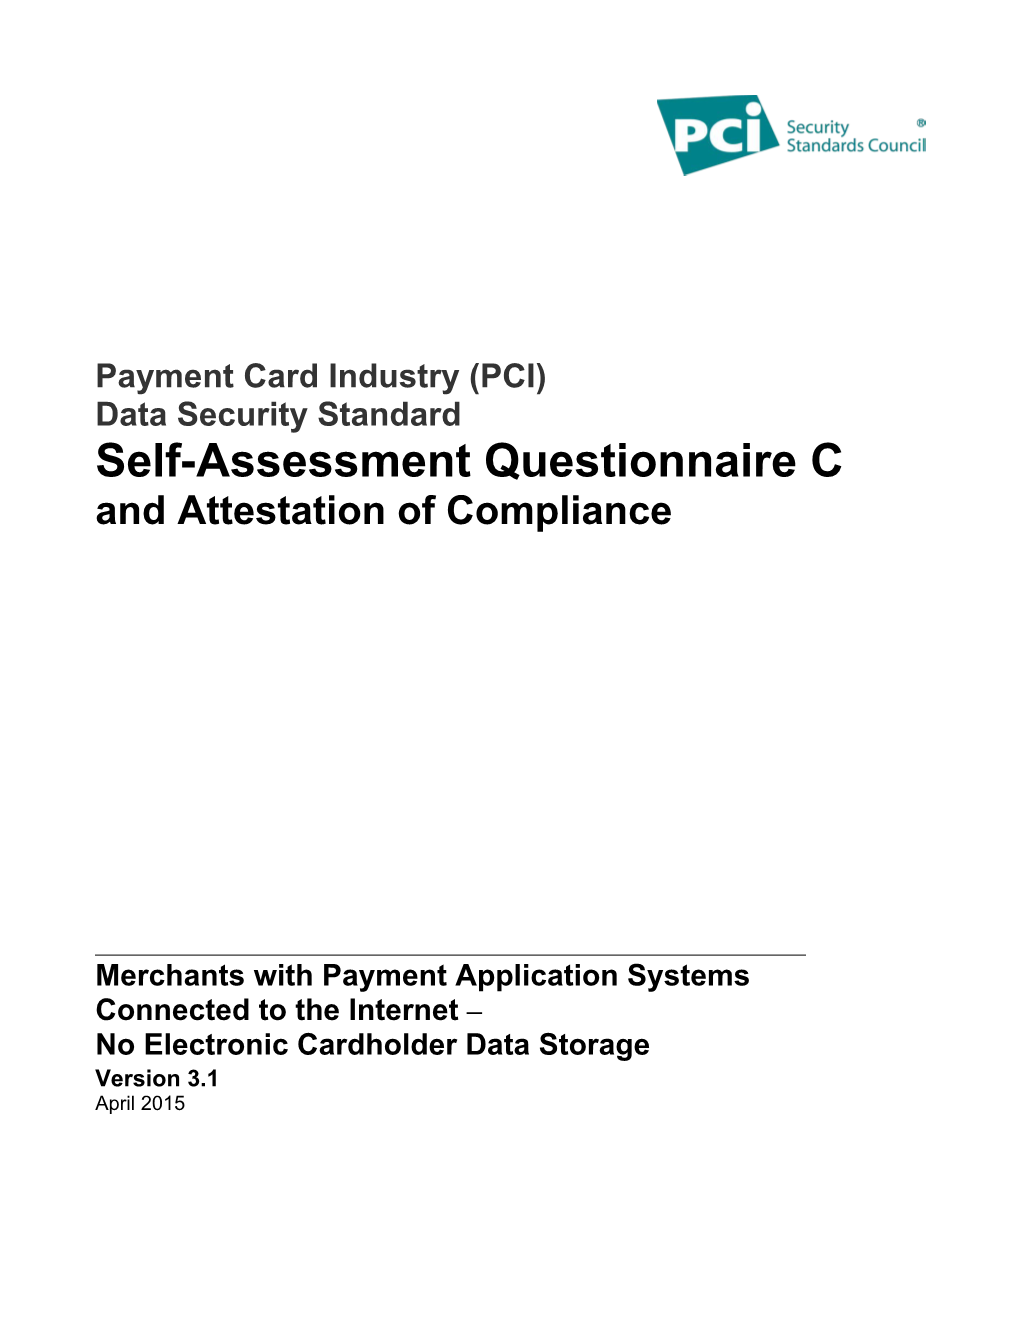 Payment Card Industry (PCI) Data Security Standard Self-Assessment Questionnaire C And